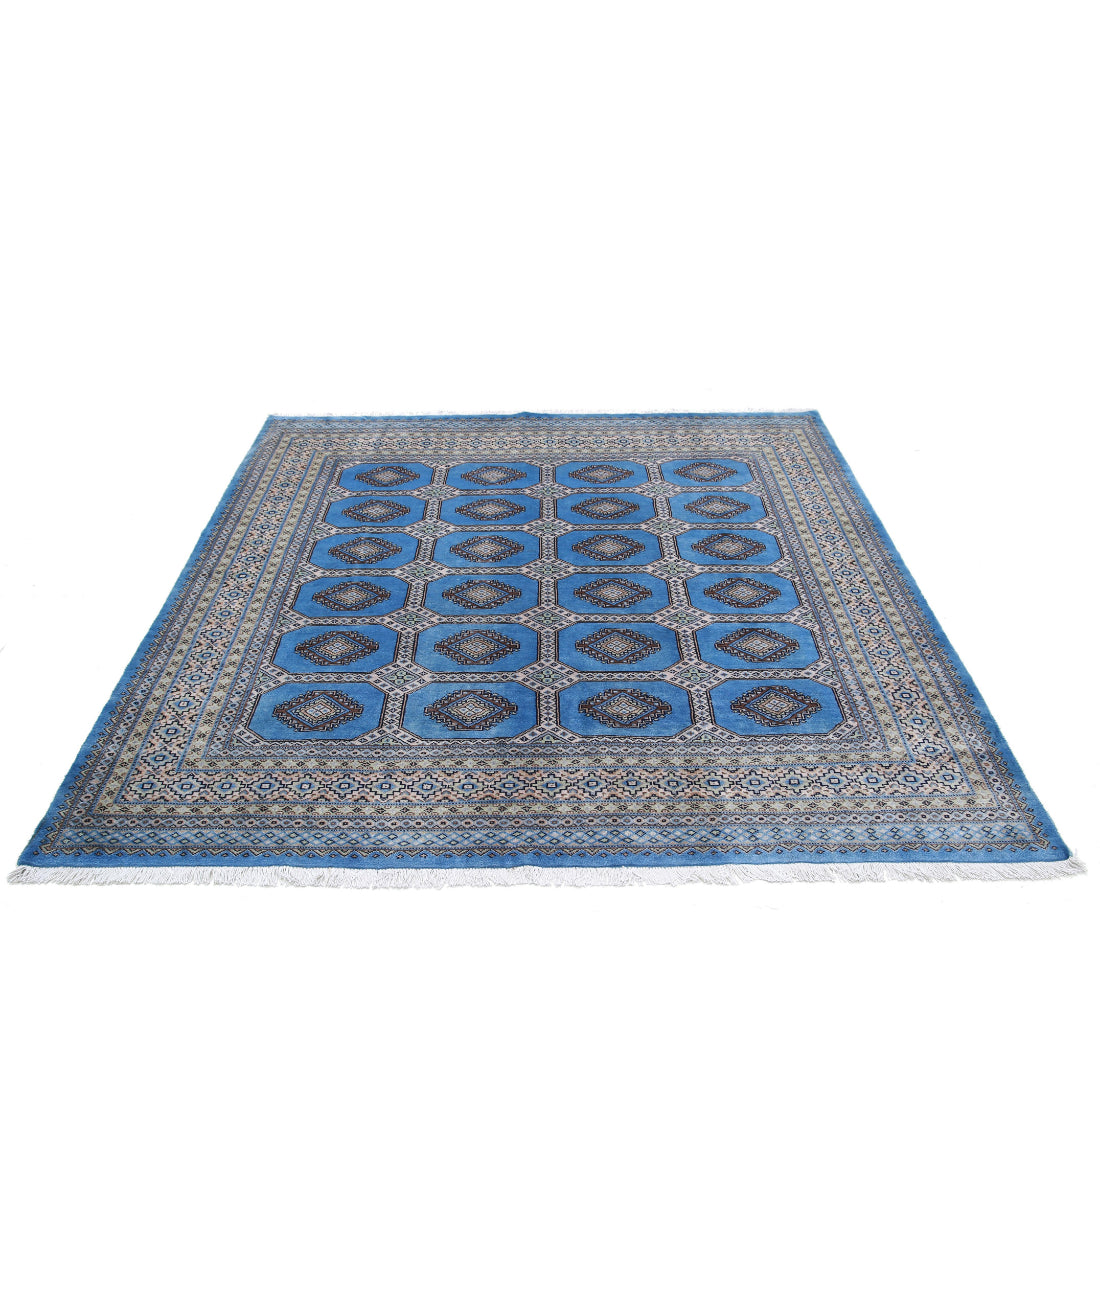 Hand Knotted Tribal Bokhara Wool Rug - 6'7'' x 6'5'' 6'7'' x 6'5'' (198 X 193) / Blue / Ivory